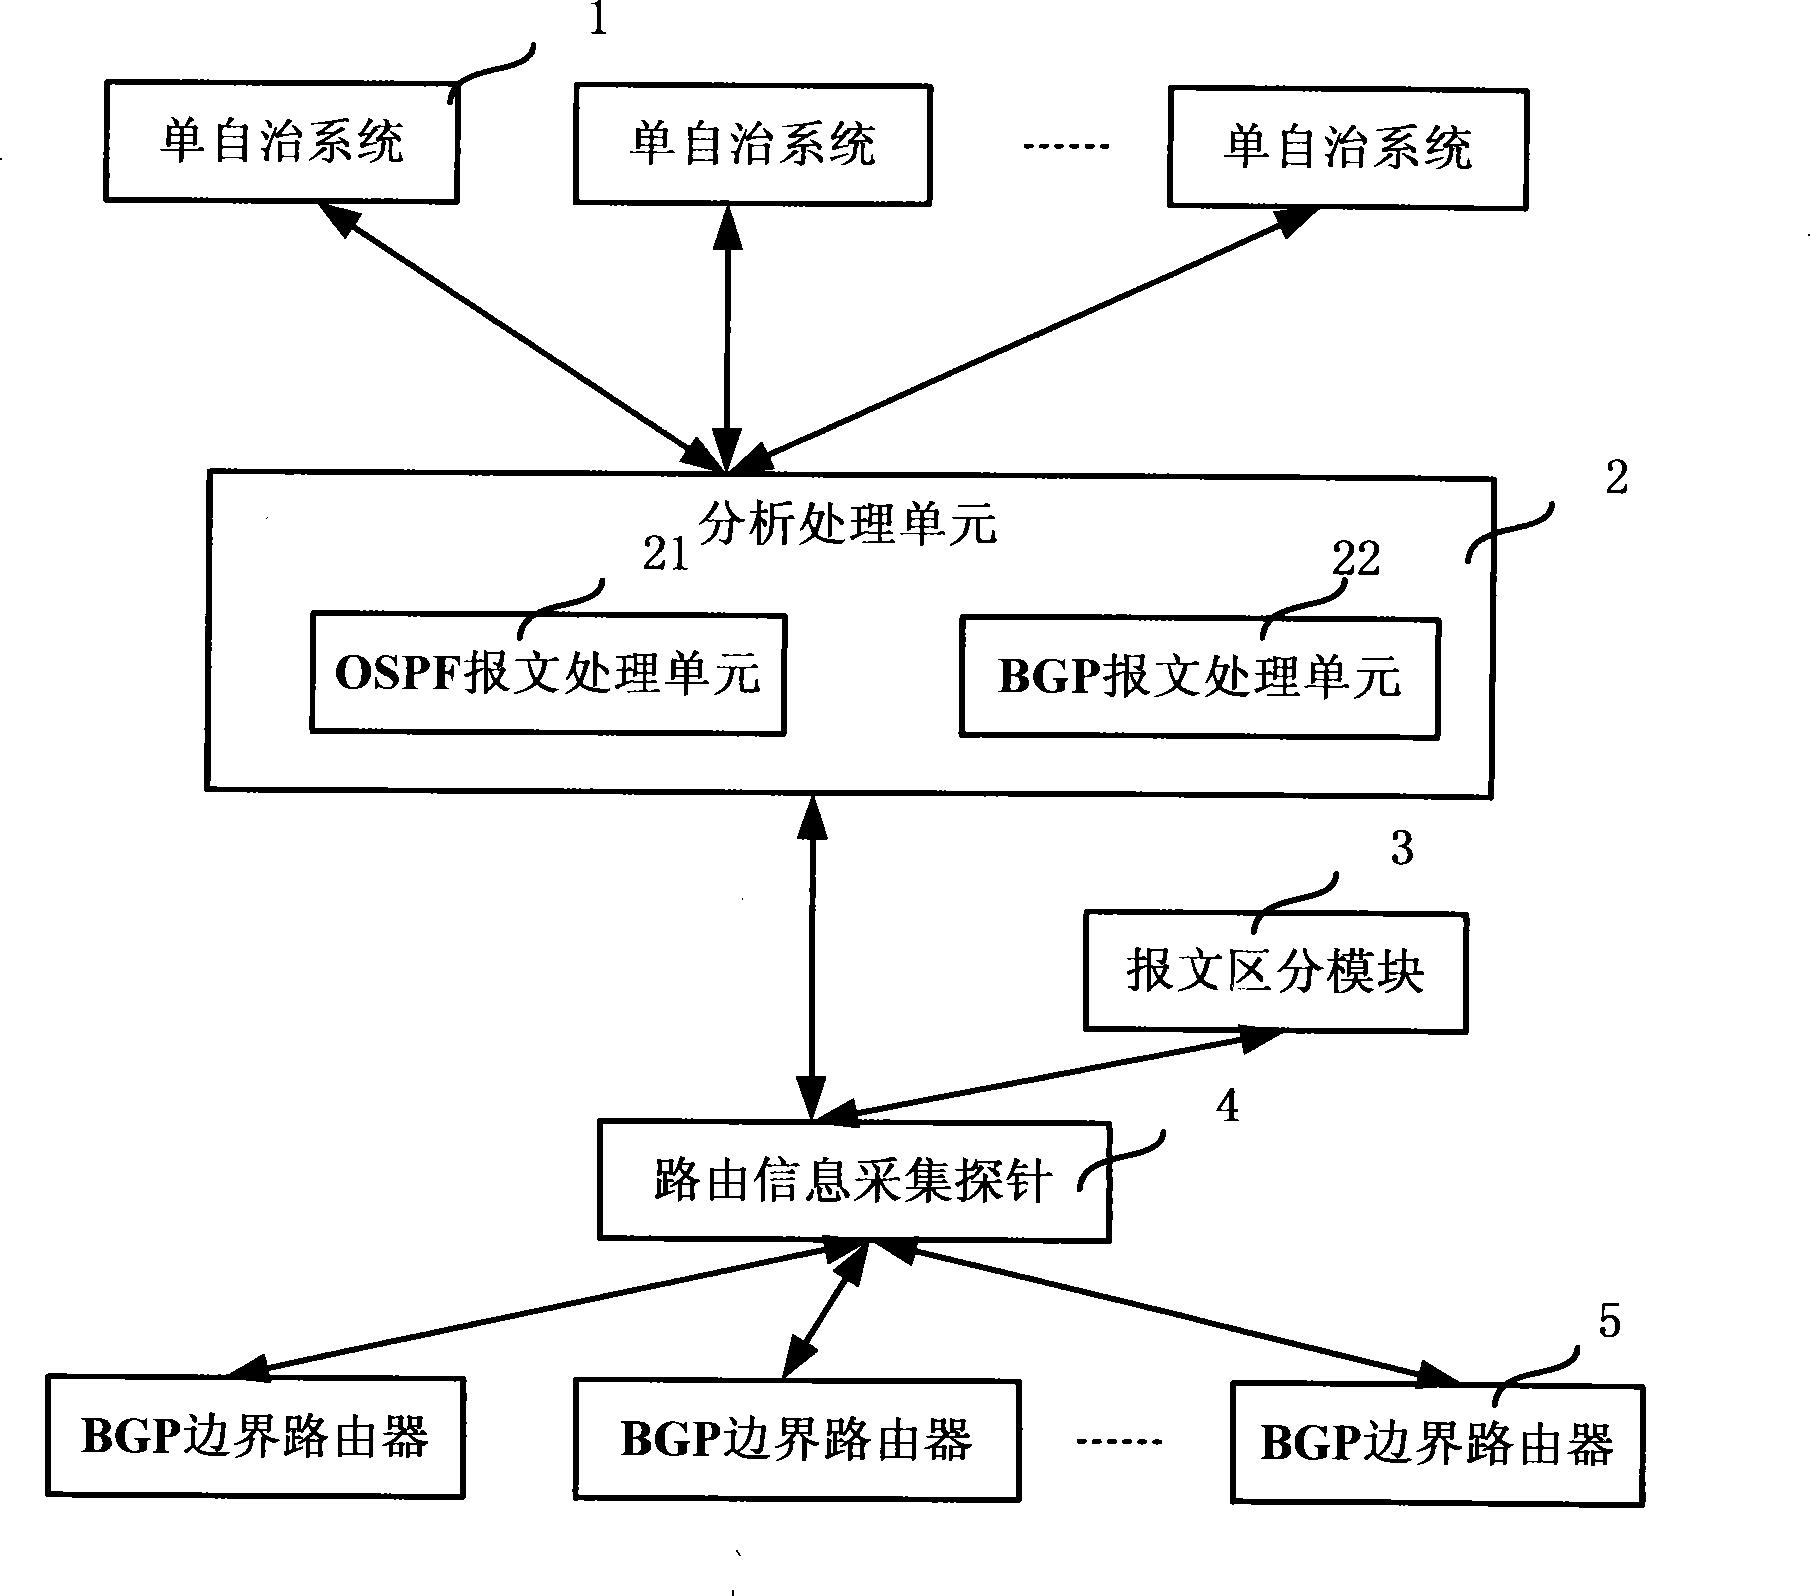 Multi self-governing system router level topology processing system and method